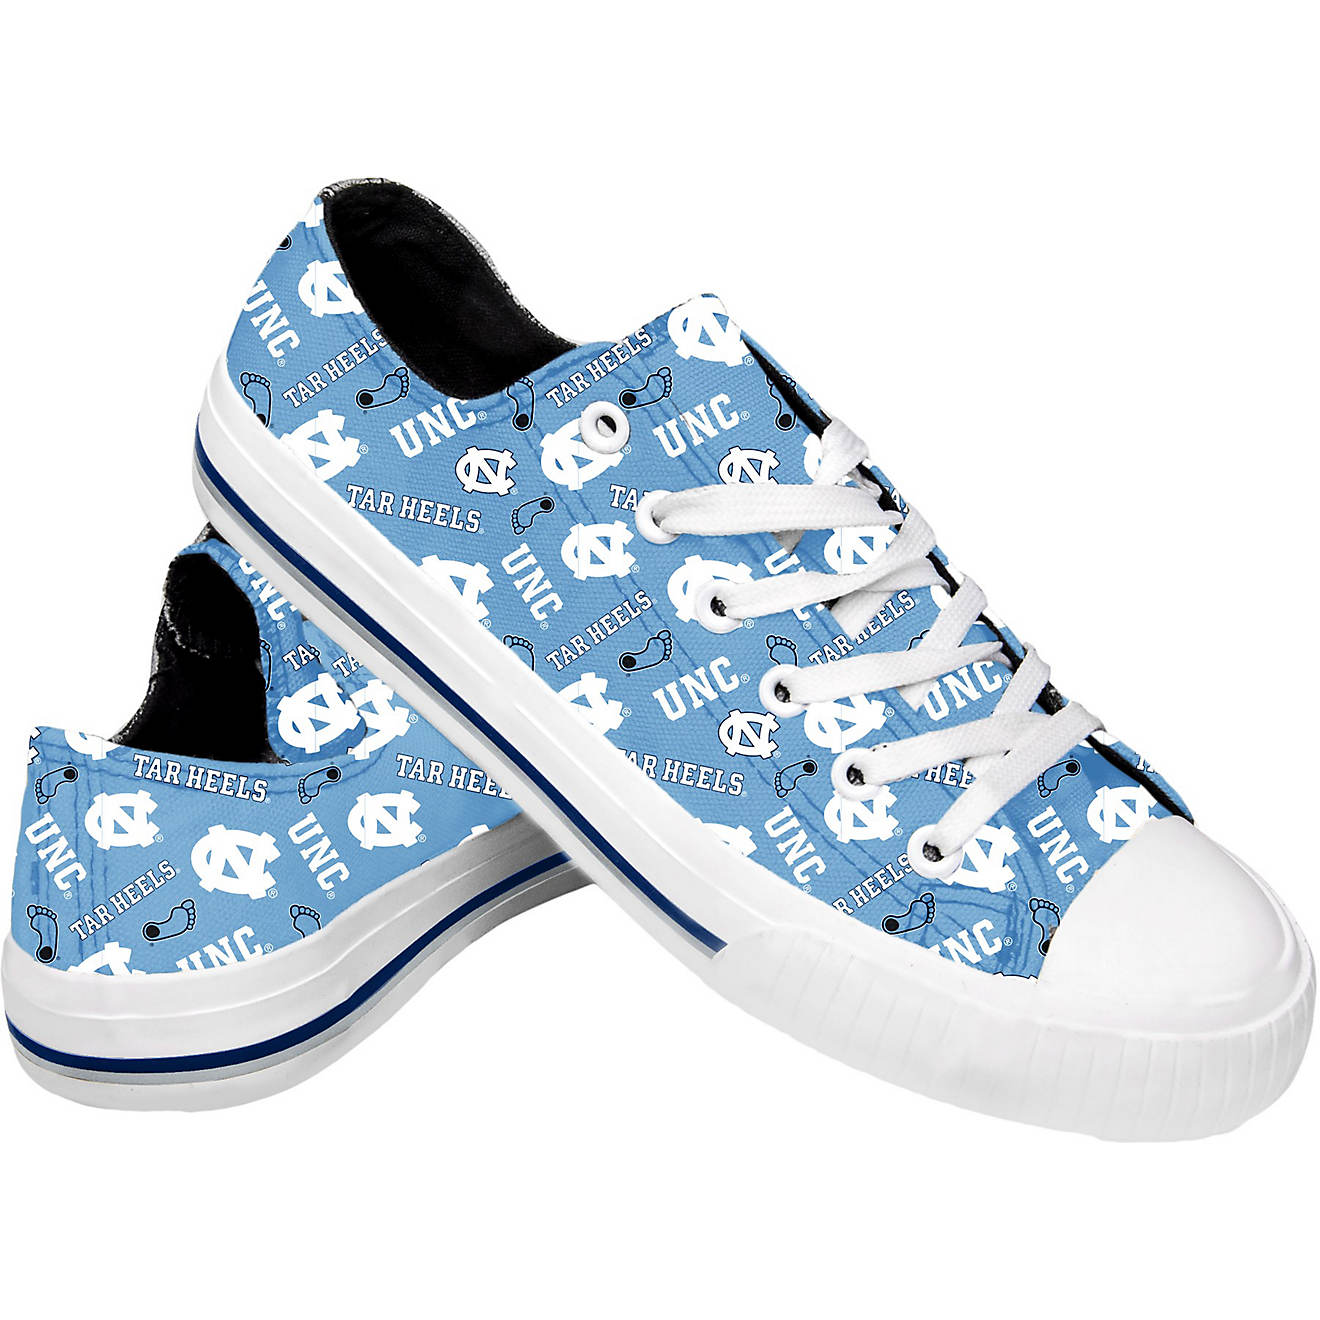 FOCO NCAA Womens Low Top Repeat Print Canvas Shoes 